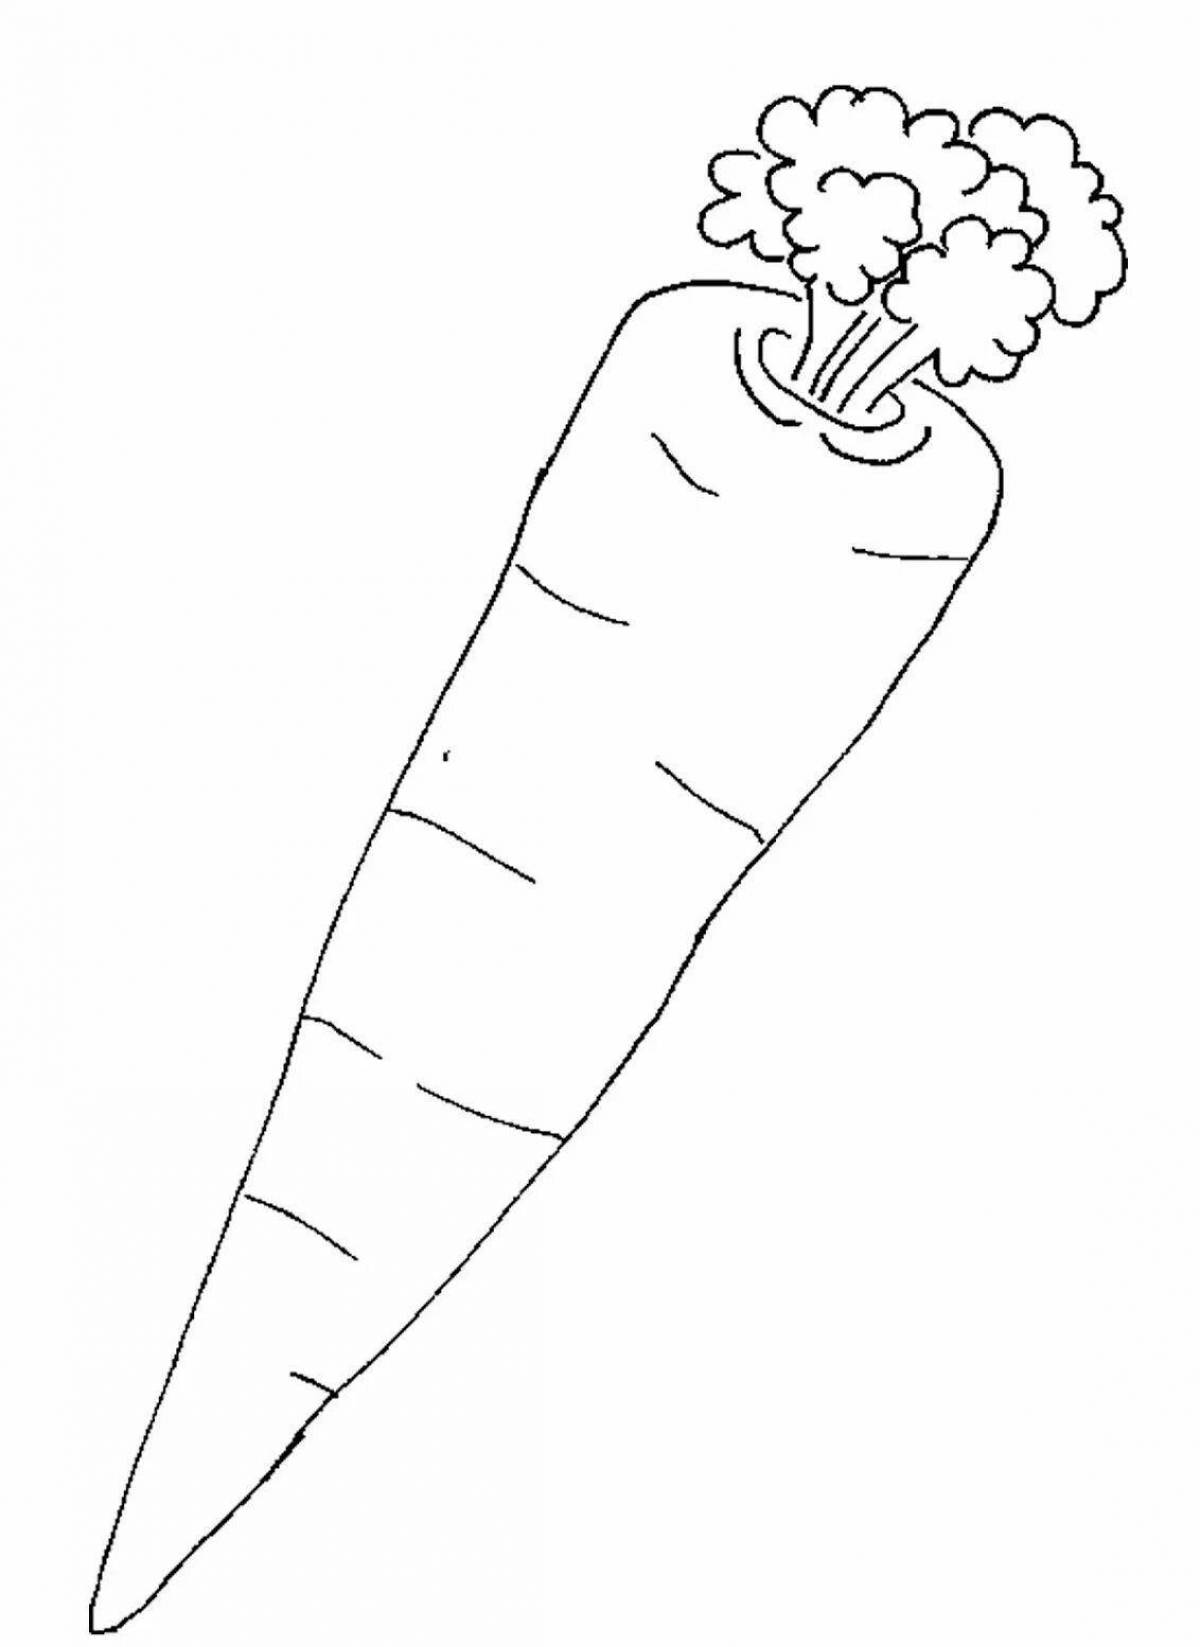 Shimmering carrot coloring page